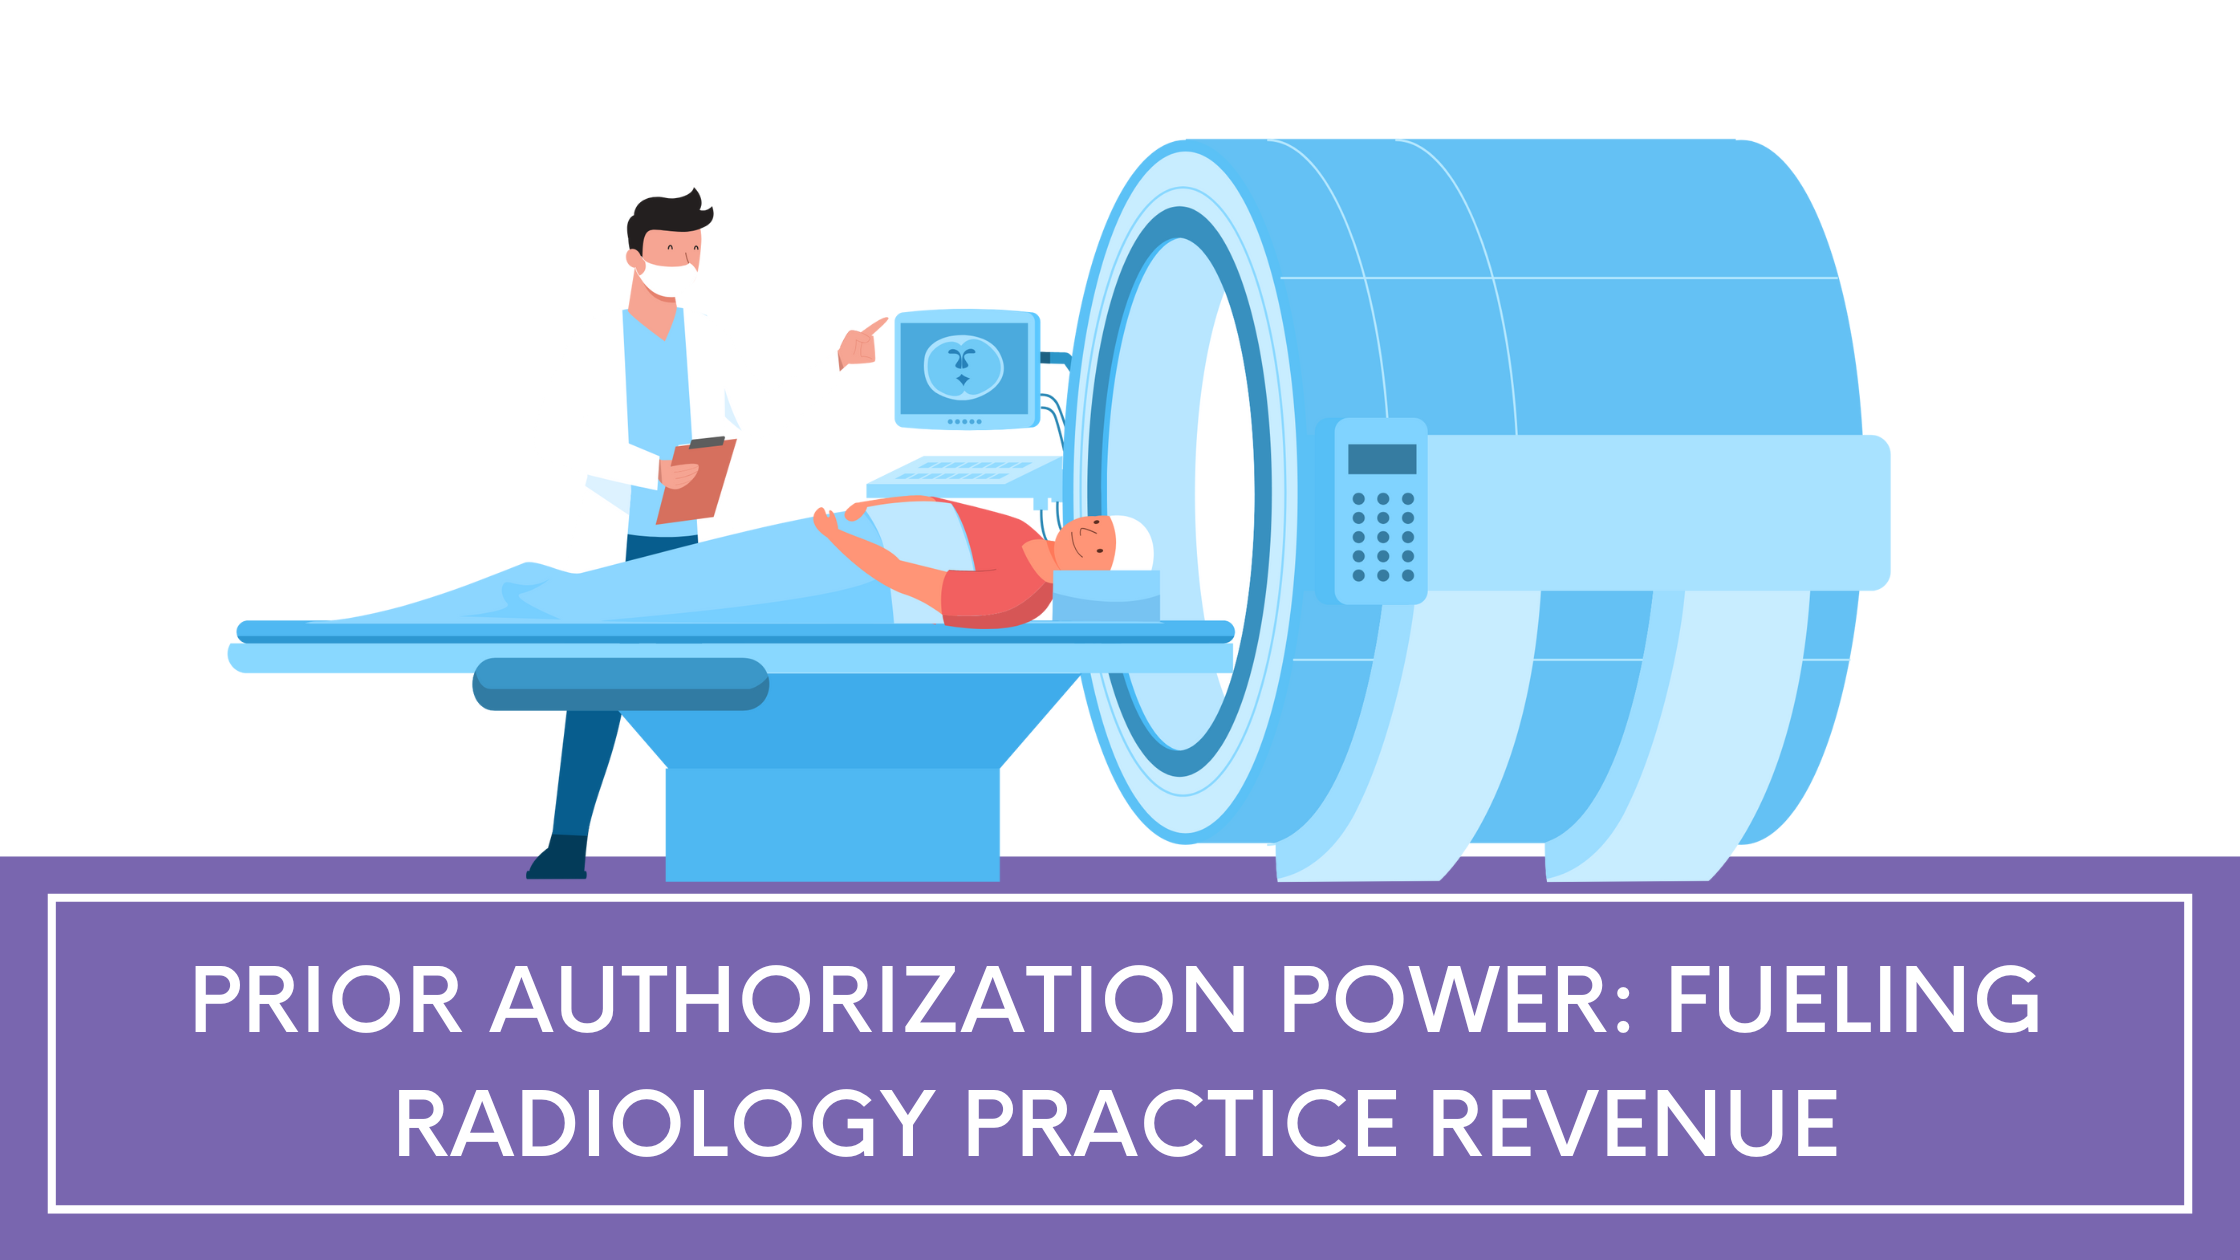 Prior authorization for radiology practices